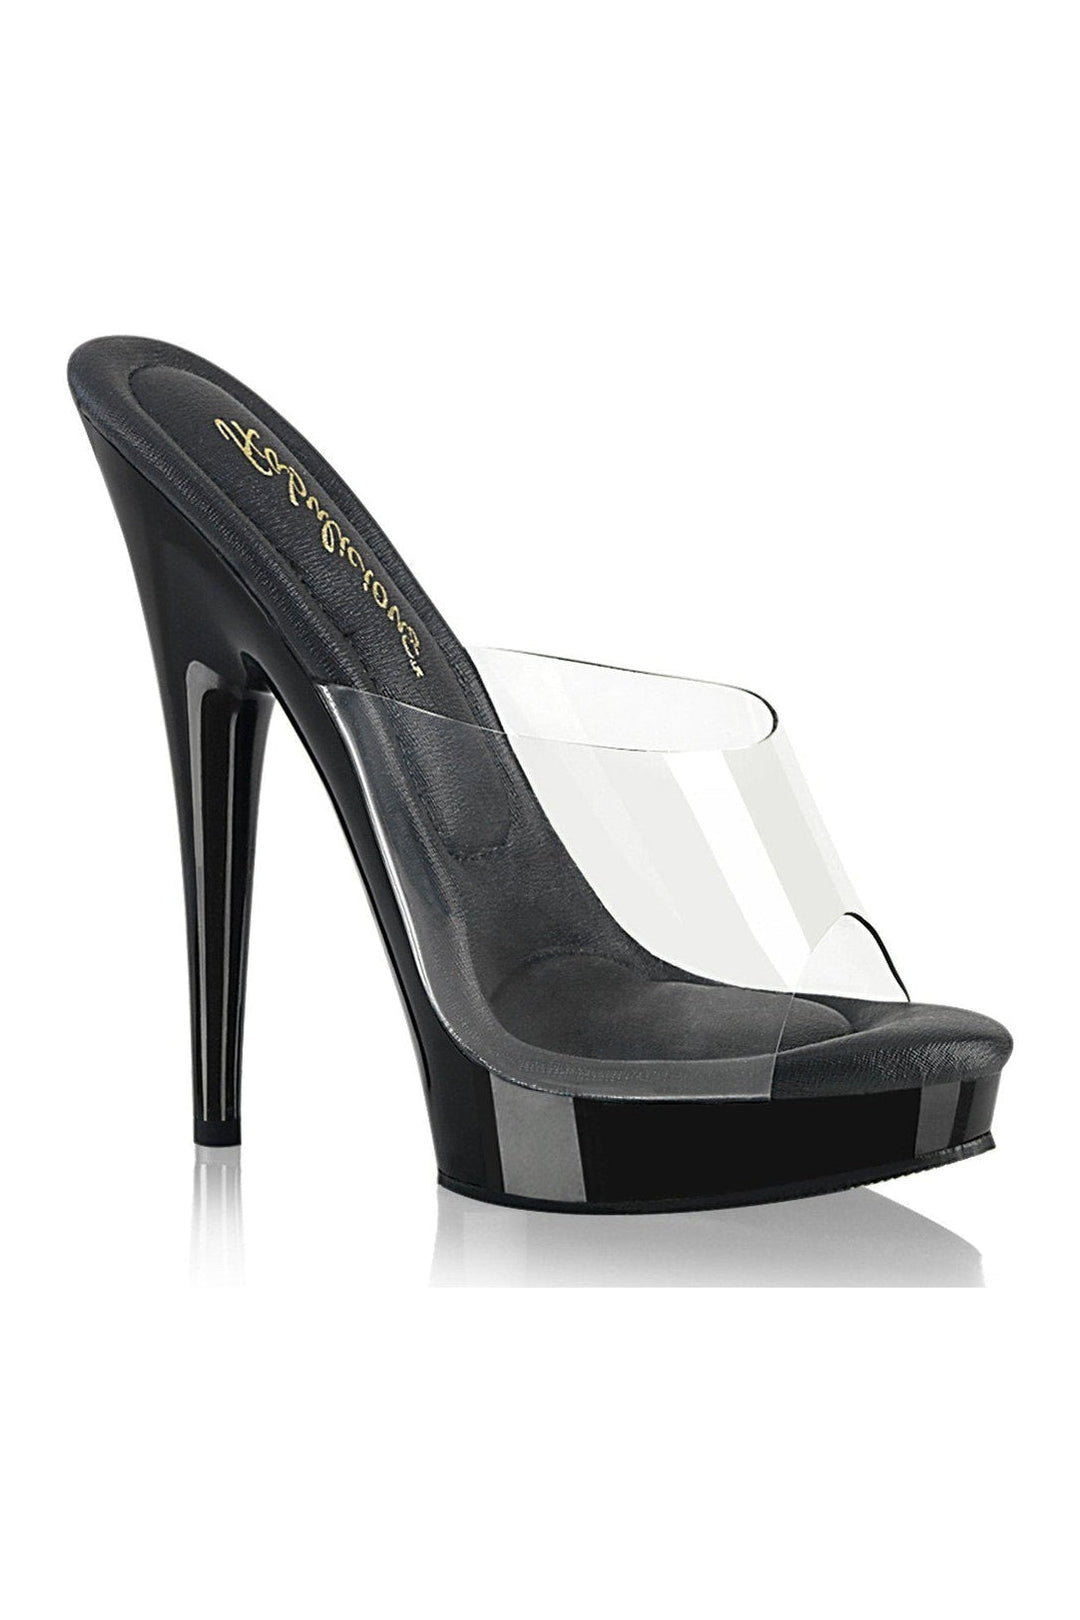 SULTRY-601 Slide | Clear Vinyl-Slides-Fabulicious-Clear-6-Vinyl-SEXYSHOES.COM